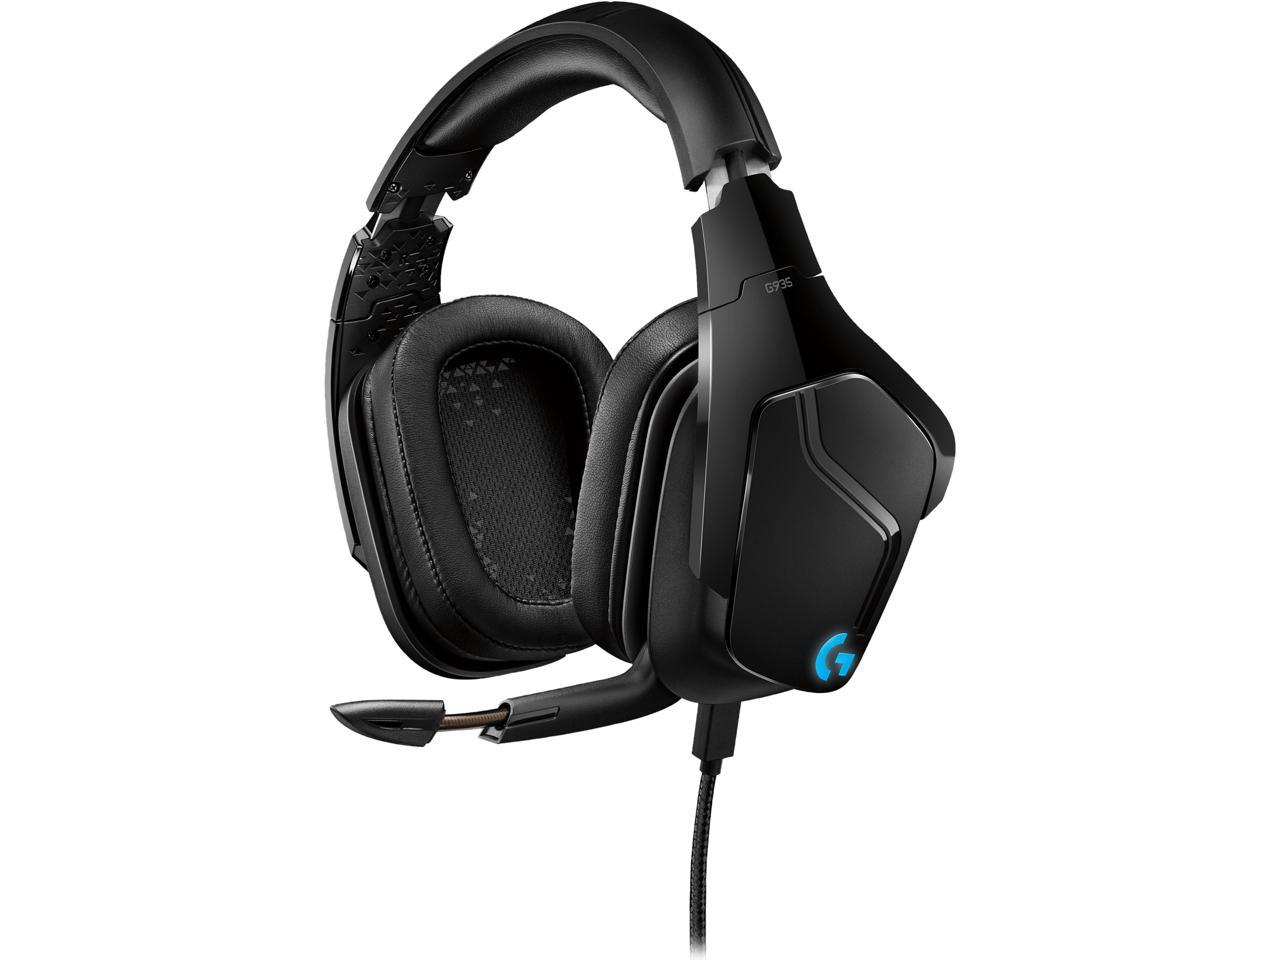 Logitech G935 Wireless 7.1 Surround Sound Over-the-Ear Gaming Headset*